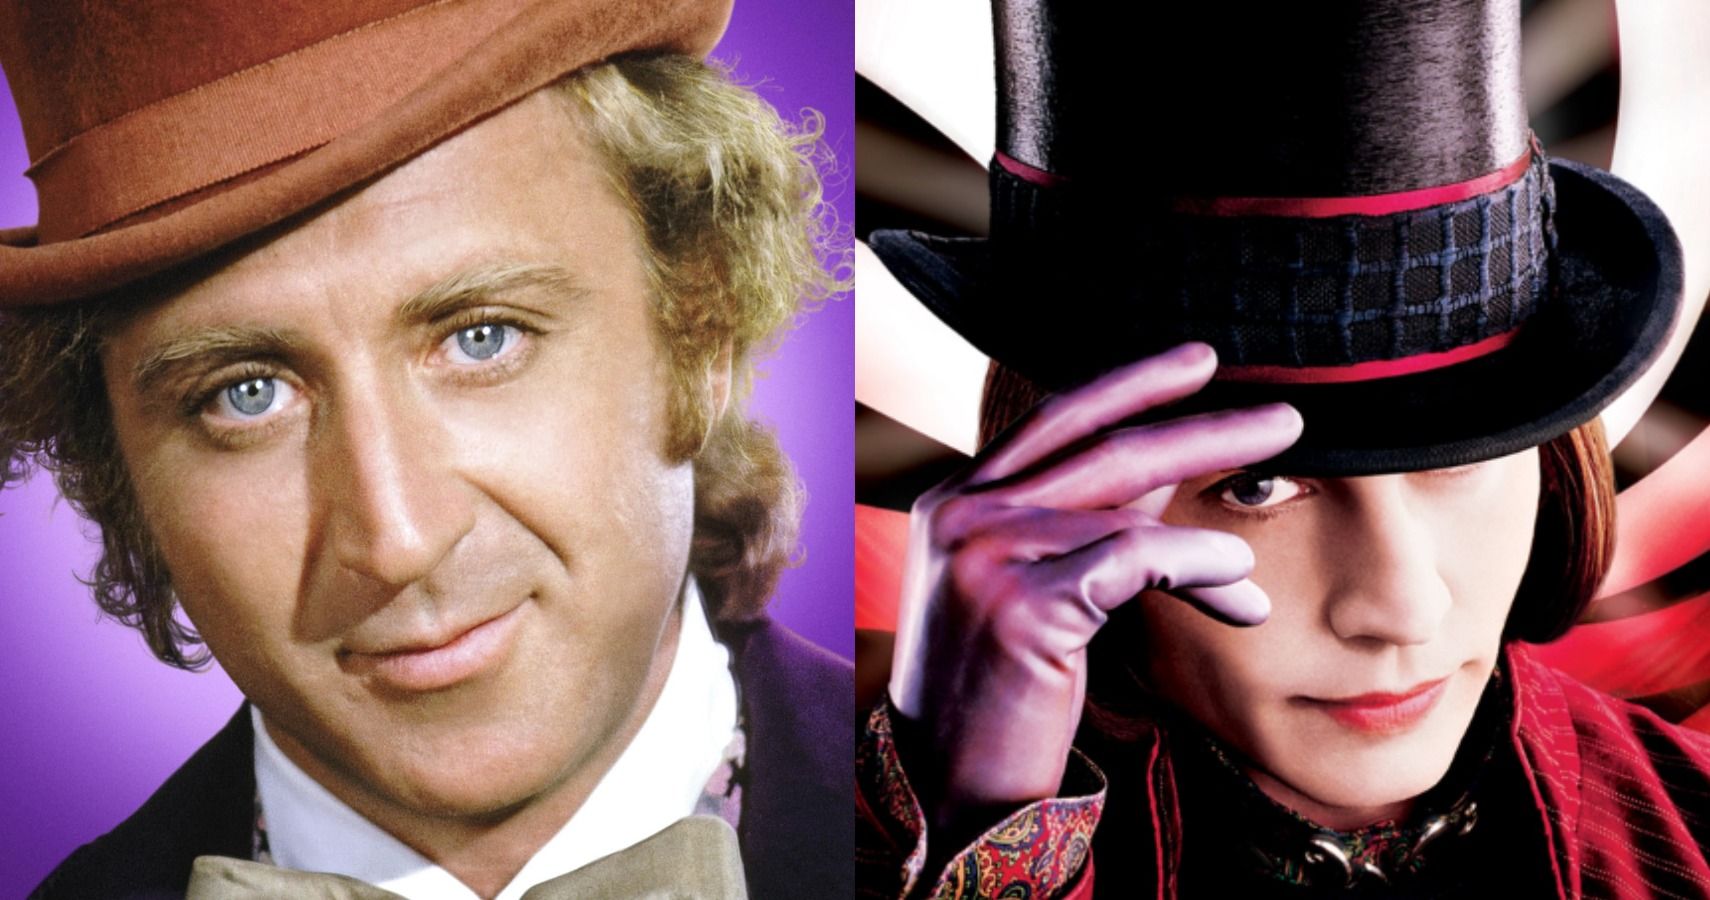 Charlie and the Chocolate Factory - The Book vs. The Movie